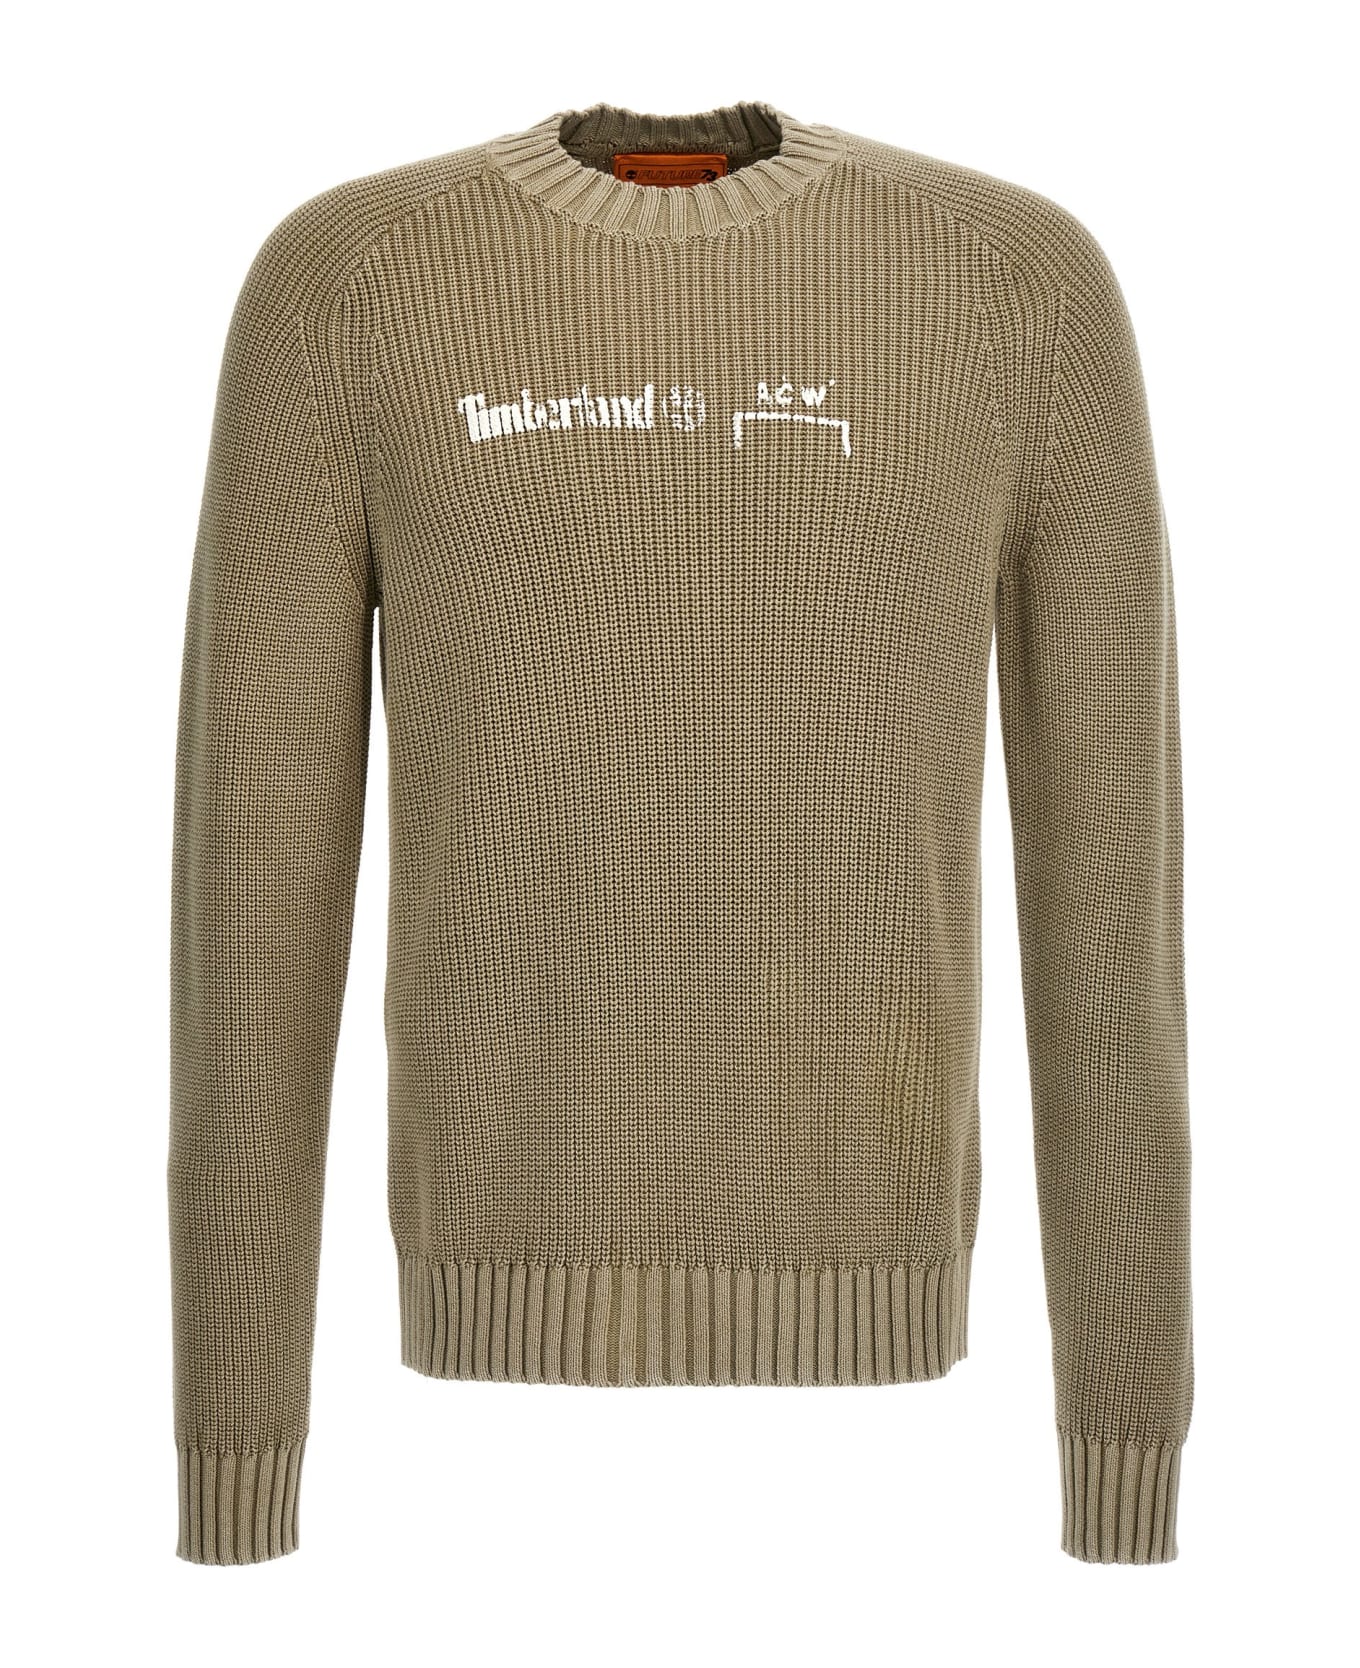 A-COLD-WALL Timberland A-cold-wall* Capsule Sweater - Green